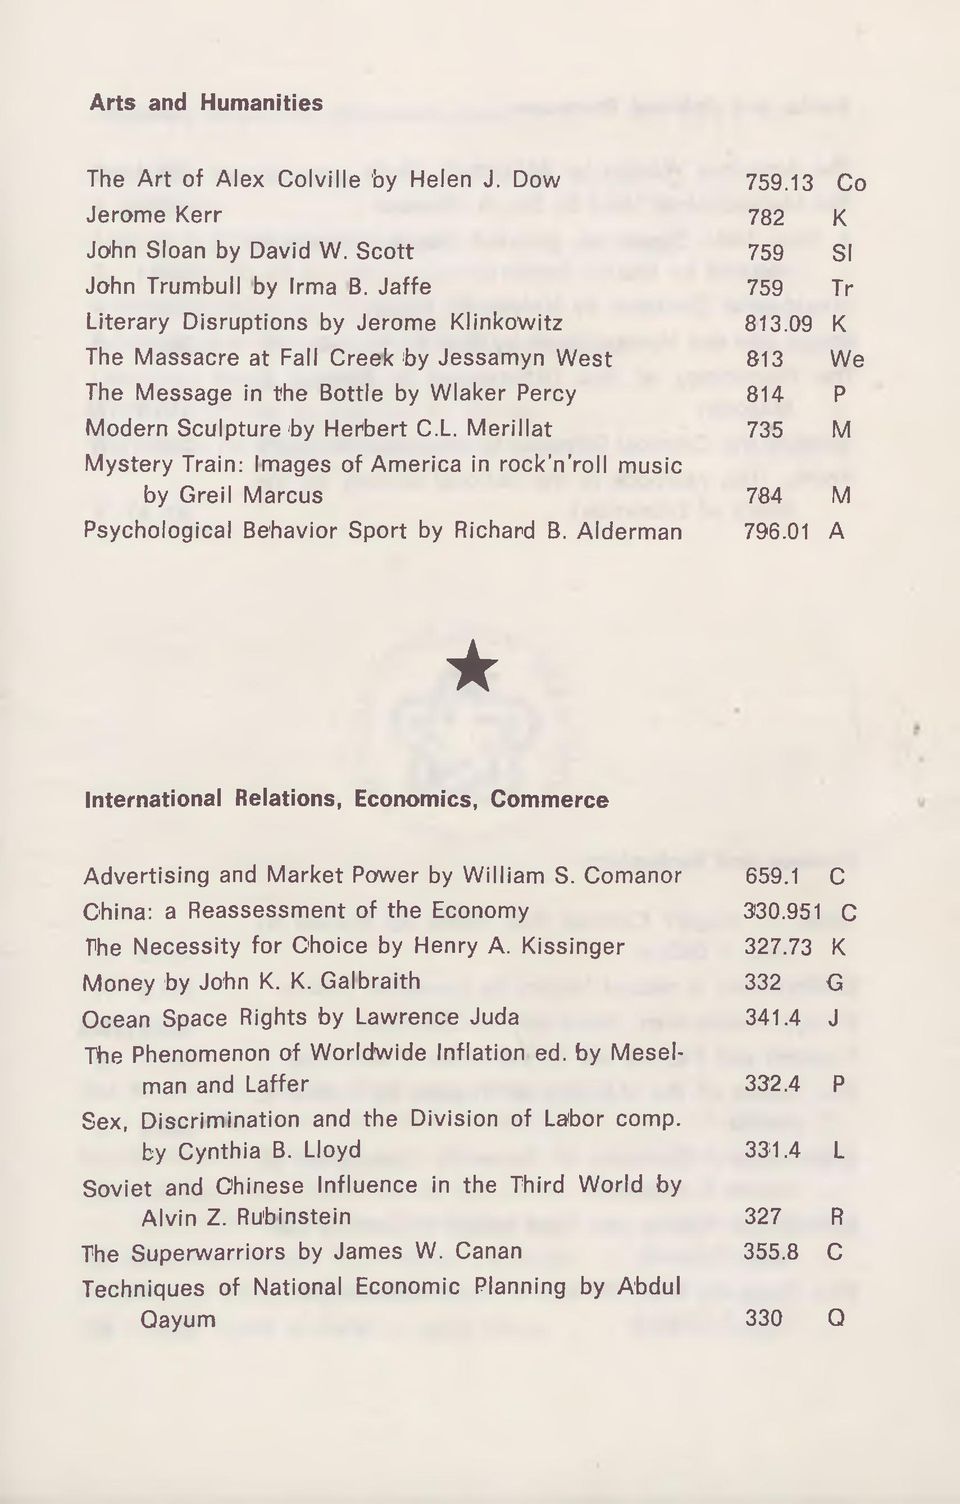 Alderman 796.01 A International Relations, Economics, Commerce Advertising and Market Power by William S. Comanor 659.1 C China: a Reassessment of the Economy 330.